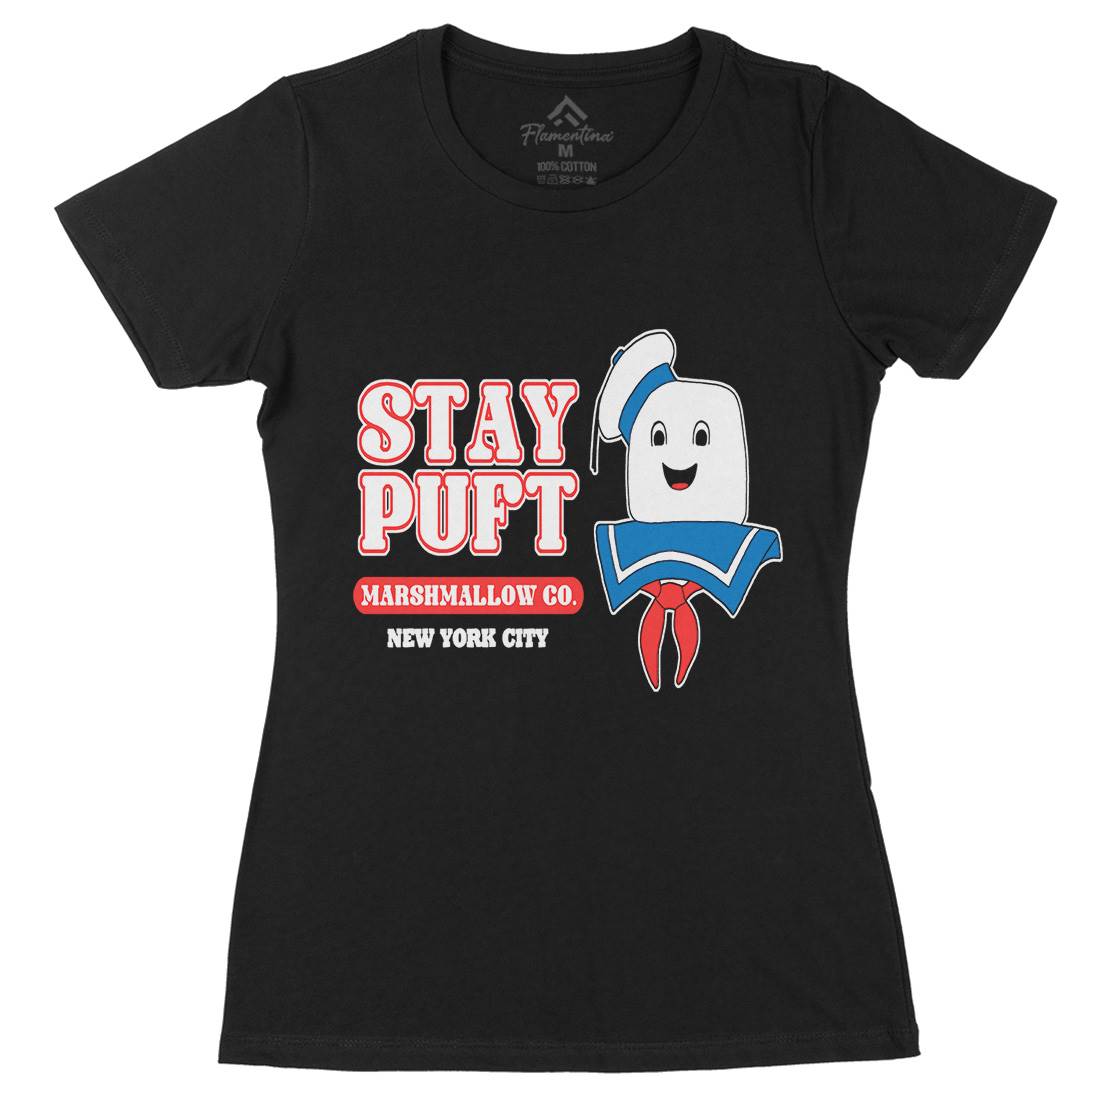 Stay Puft Co Womens Organic Crew Neck T-Shirt Space D141